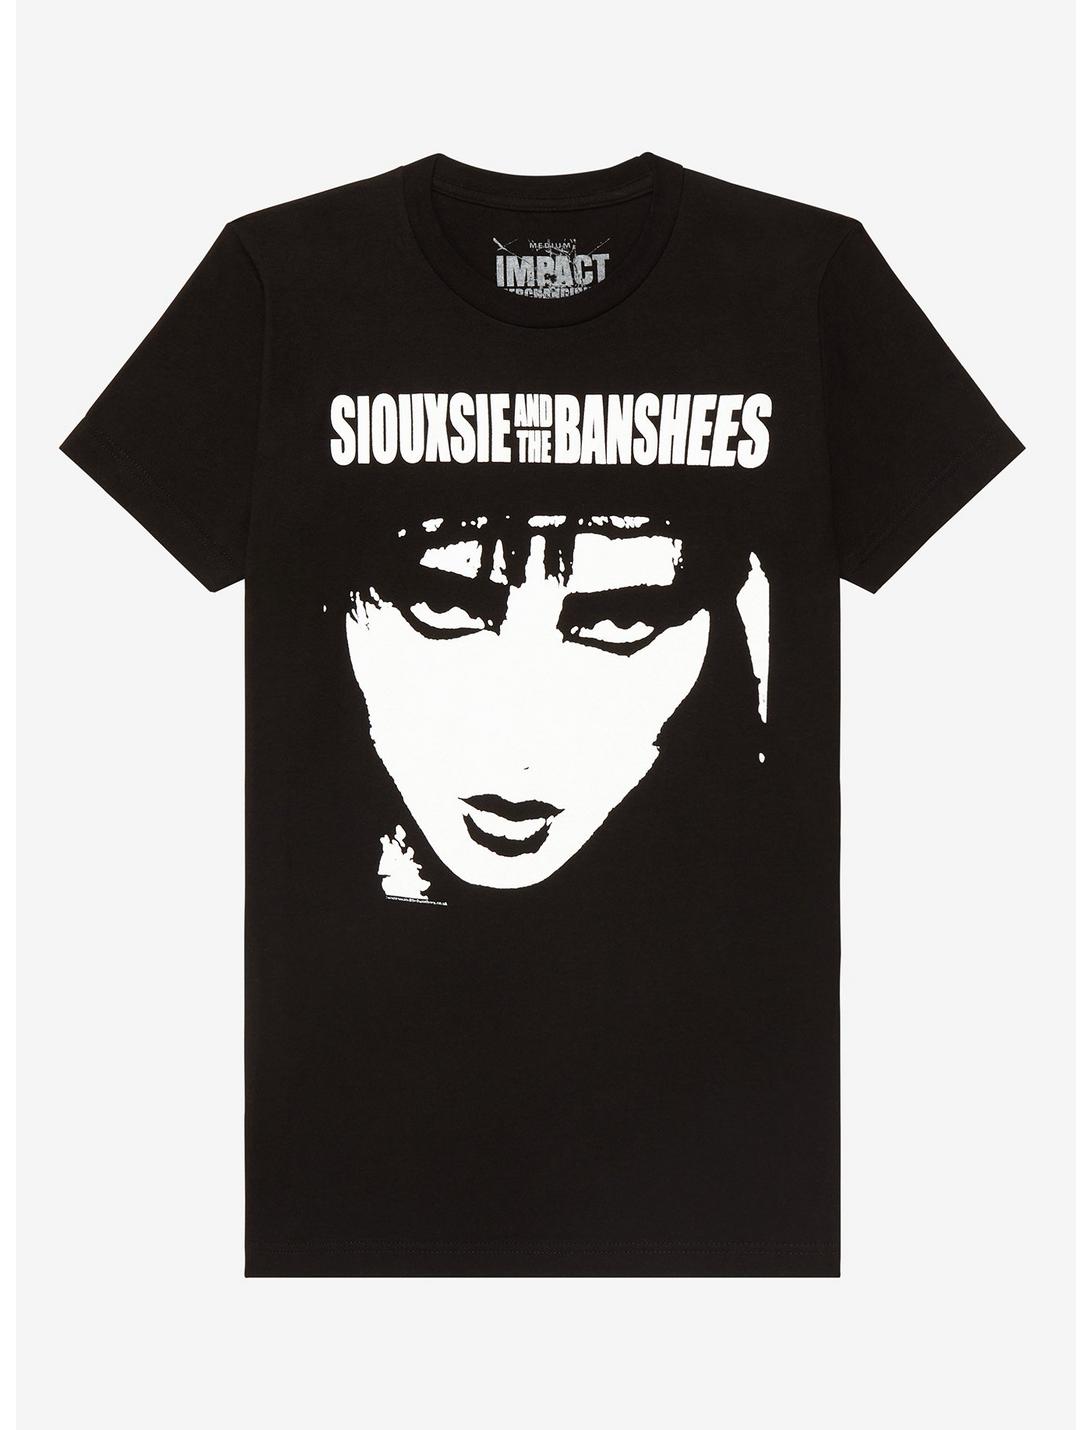 Siouxsie And The Banshees Boyfriend Fit Girls T-Shirt, BLACK, hi-res